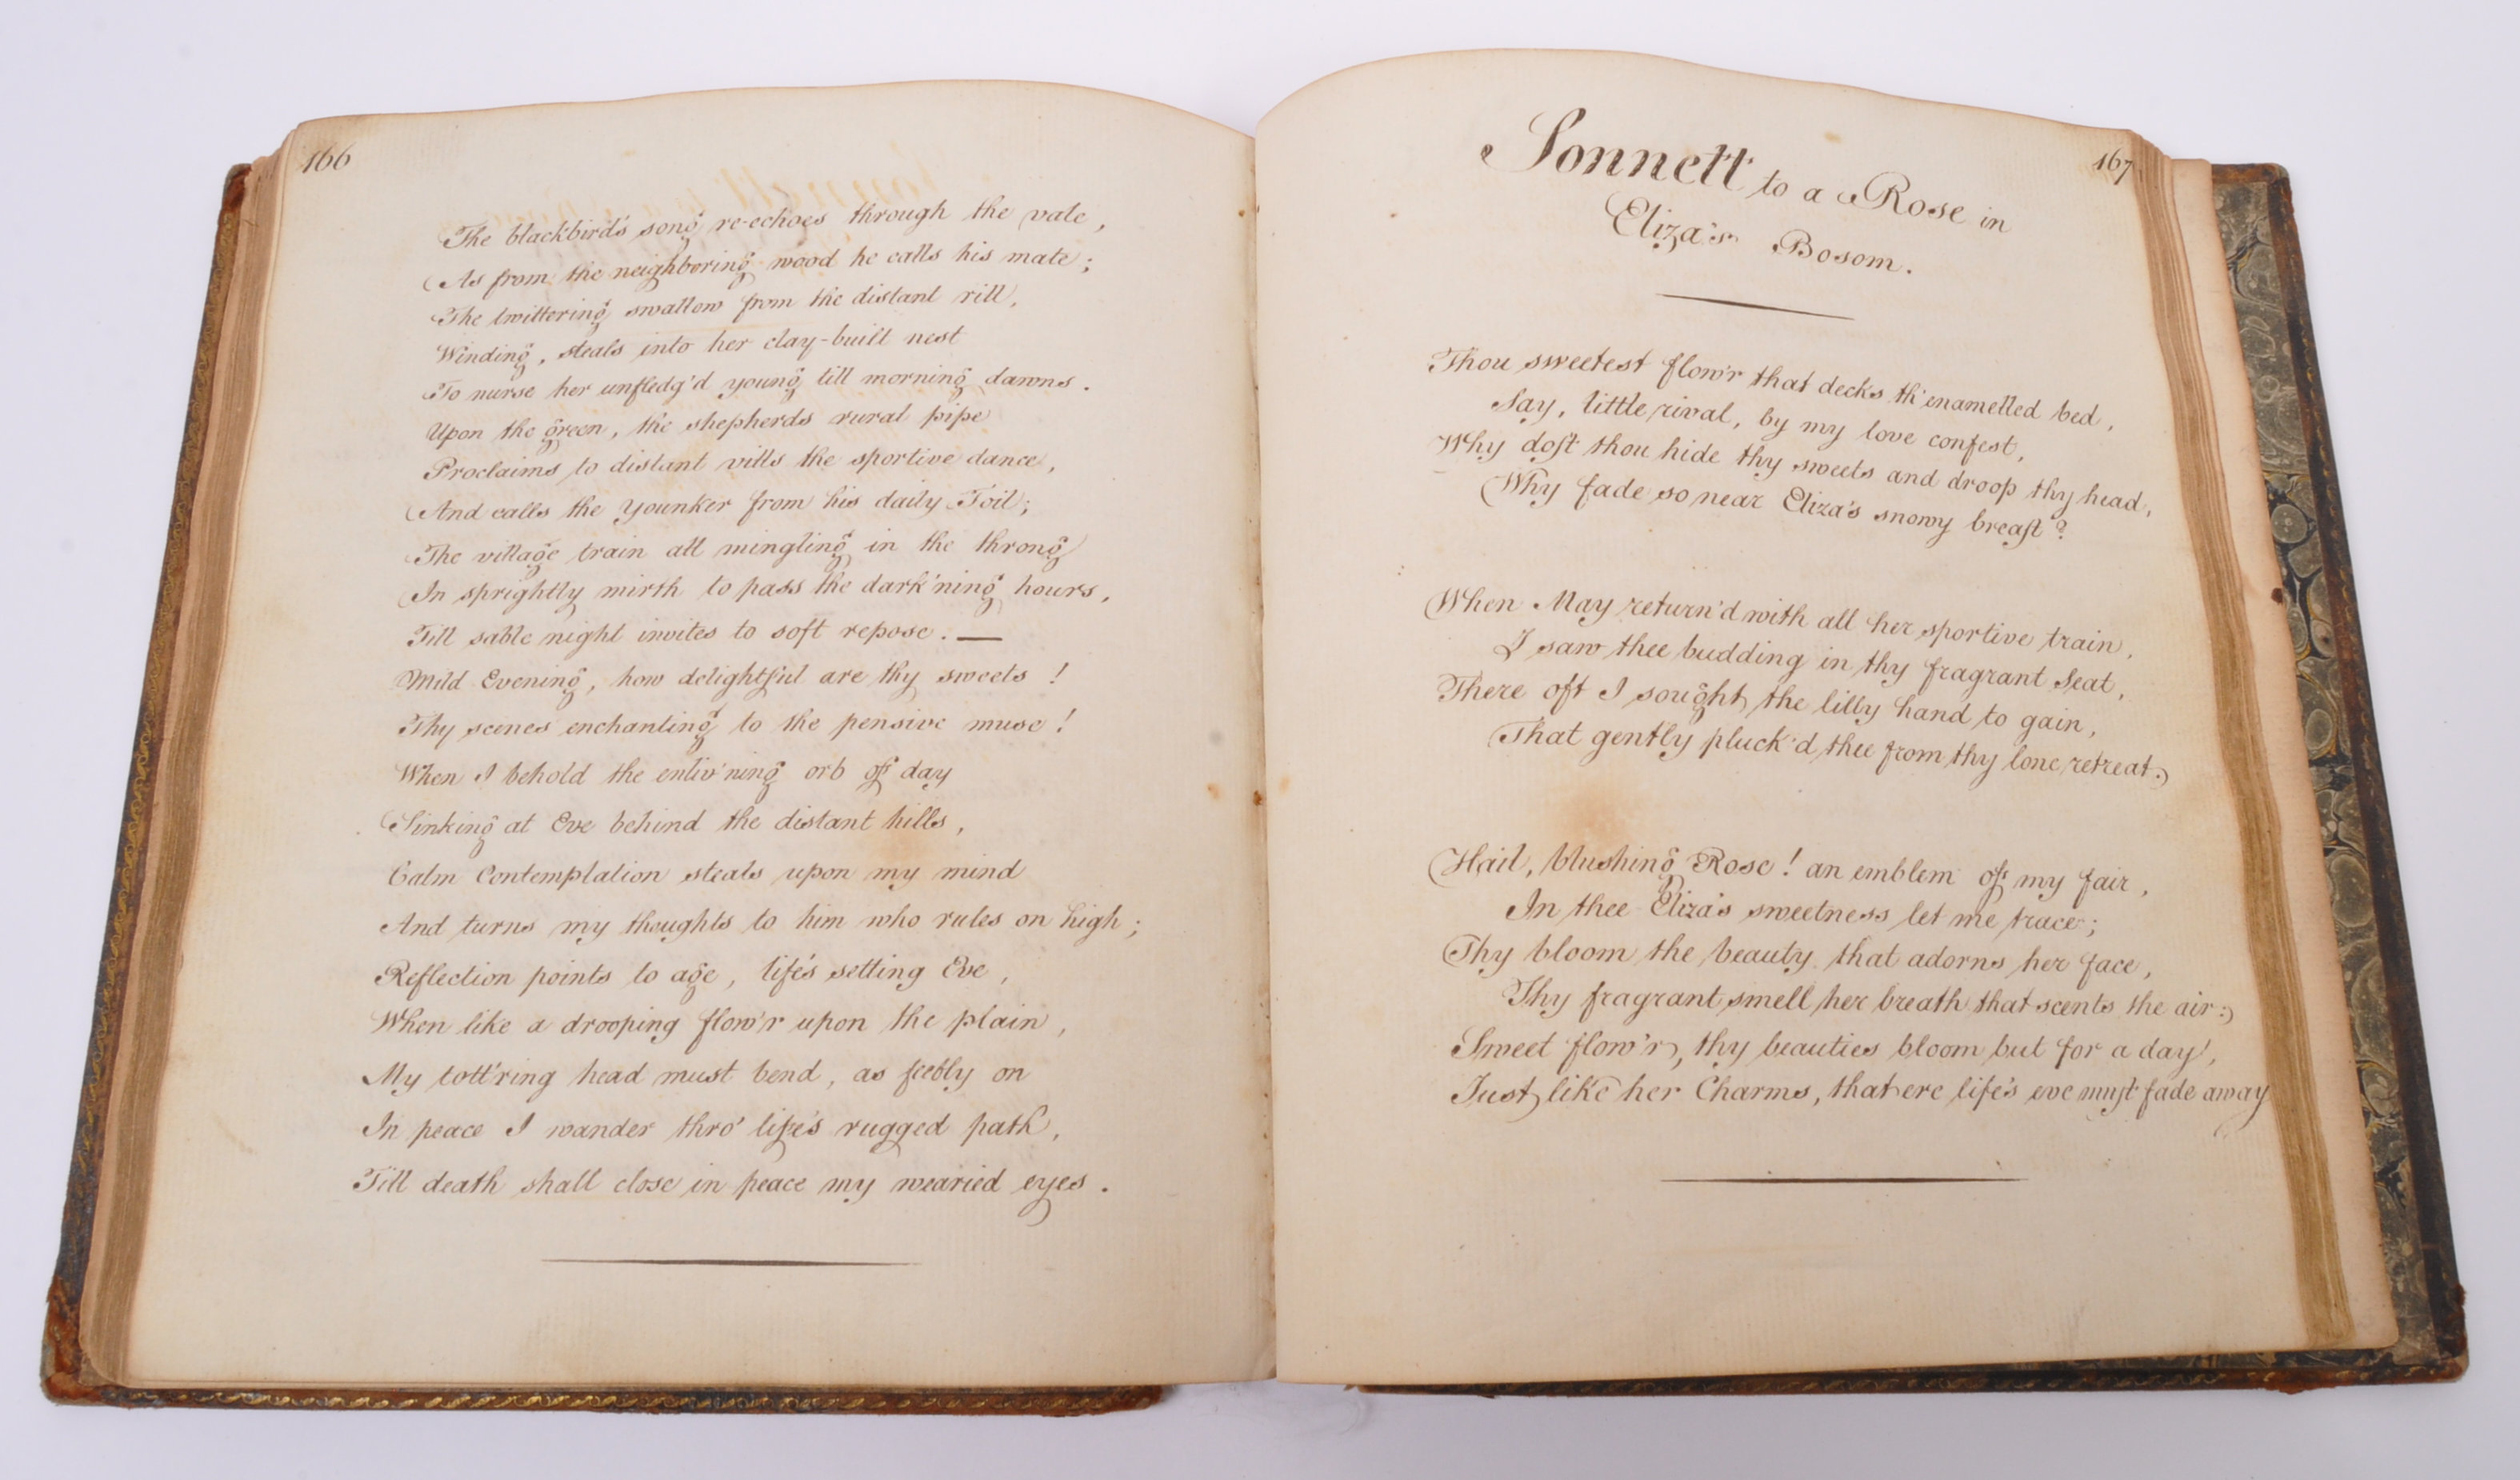 1794 - A COLLECTION OF POEMS - HANDWRITTEN MANUSCRIPT BOOK - Image 11 of 13